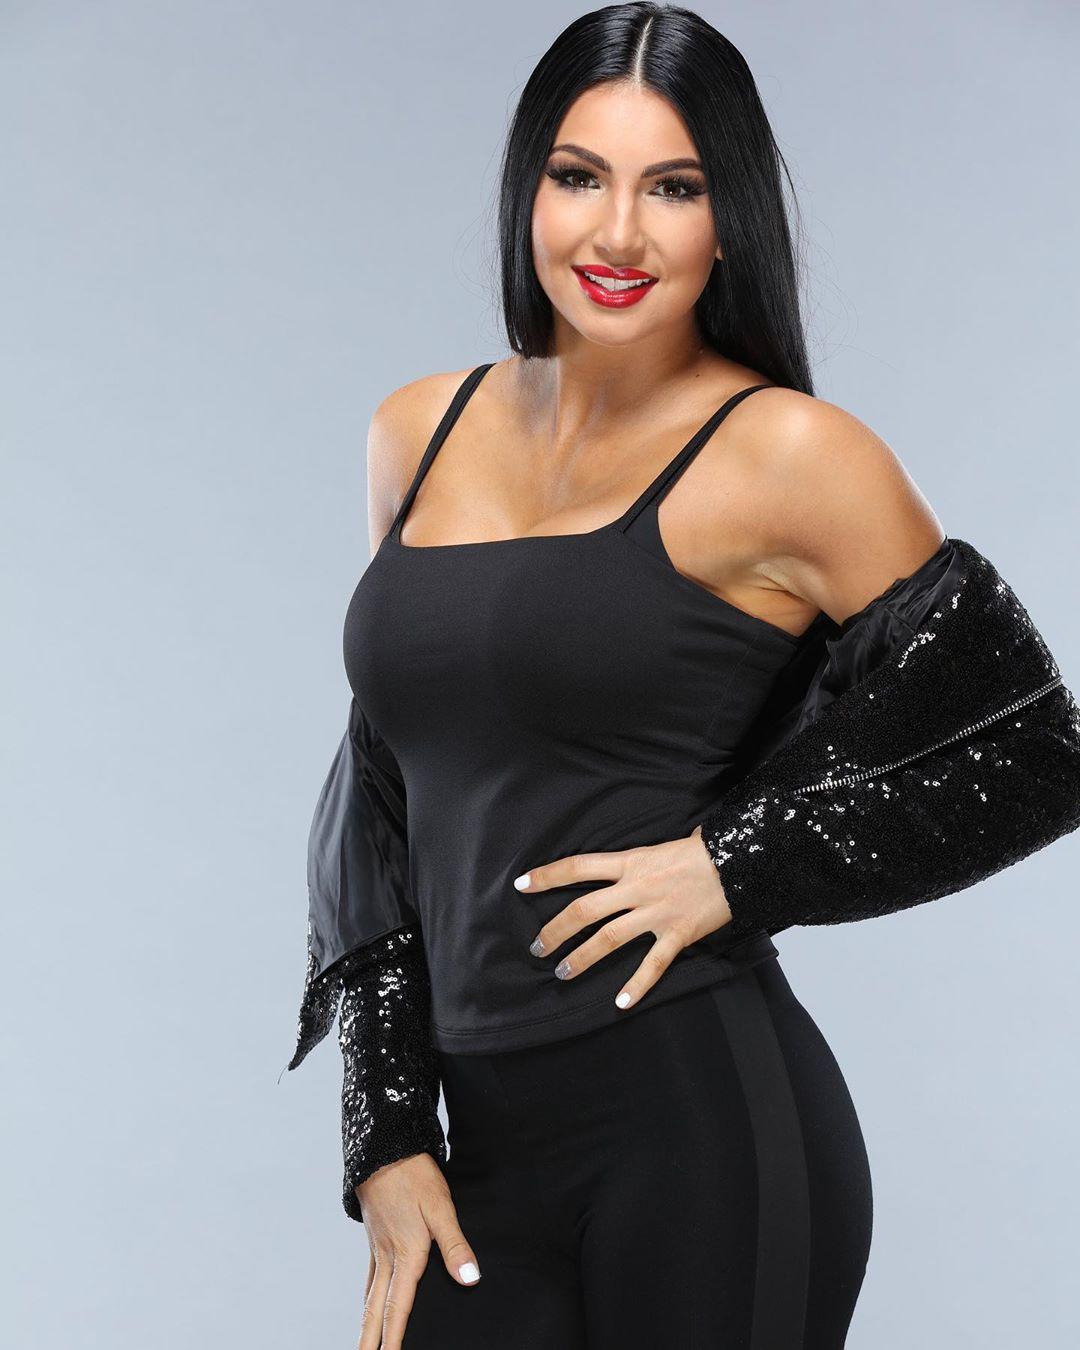 60+ Hot Pictures Of Billie Kay Will Rock The WWE Fan Inside You 246